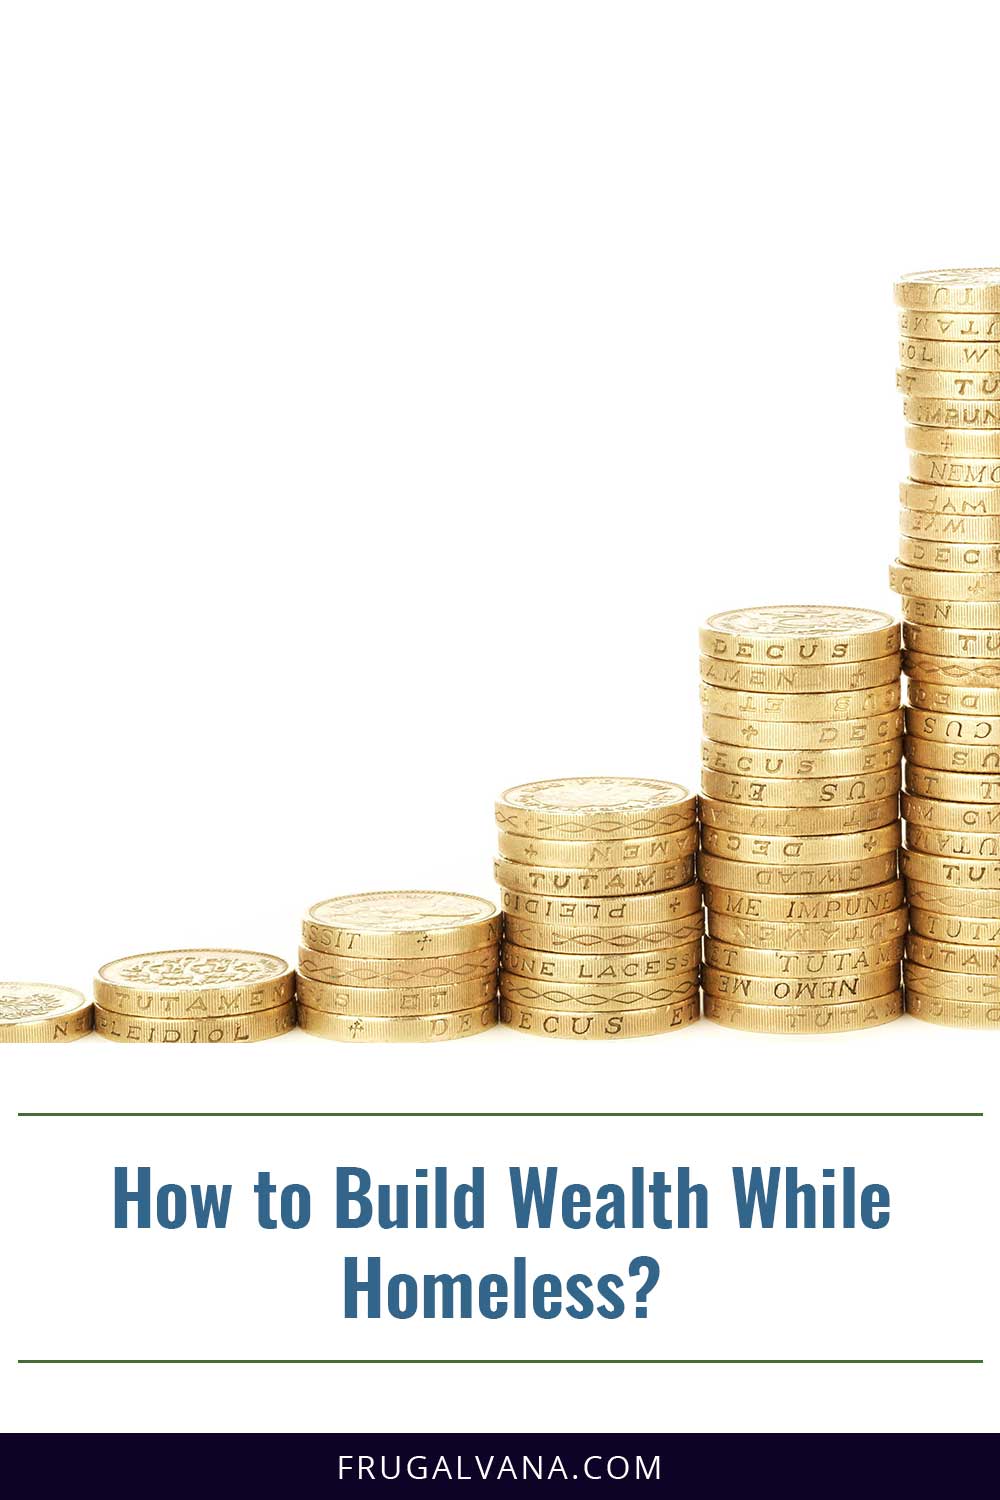 How to Build Wealth While Homeless?